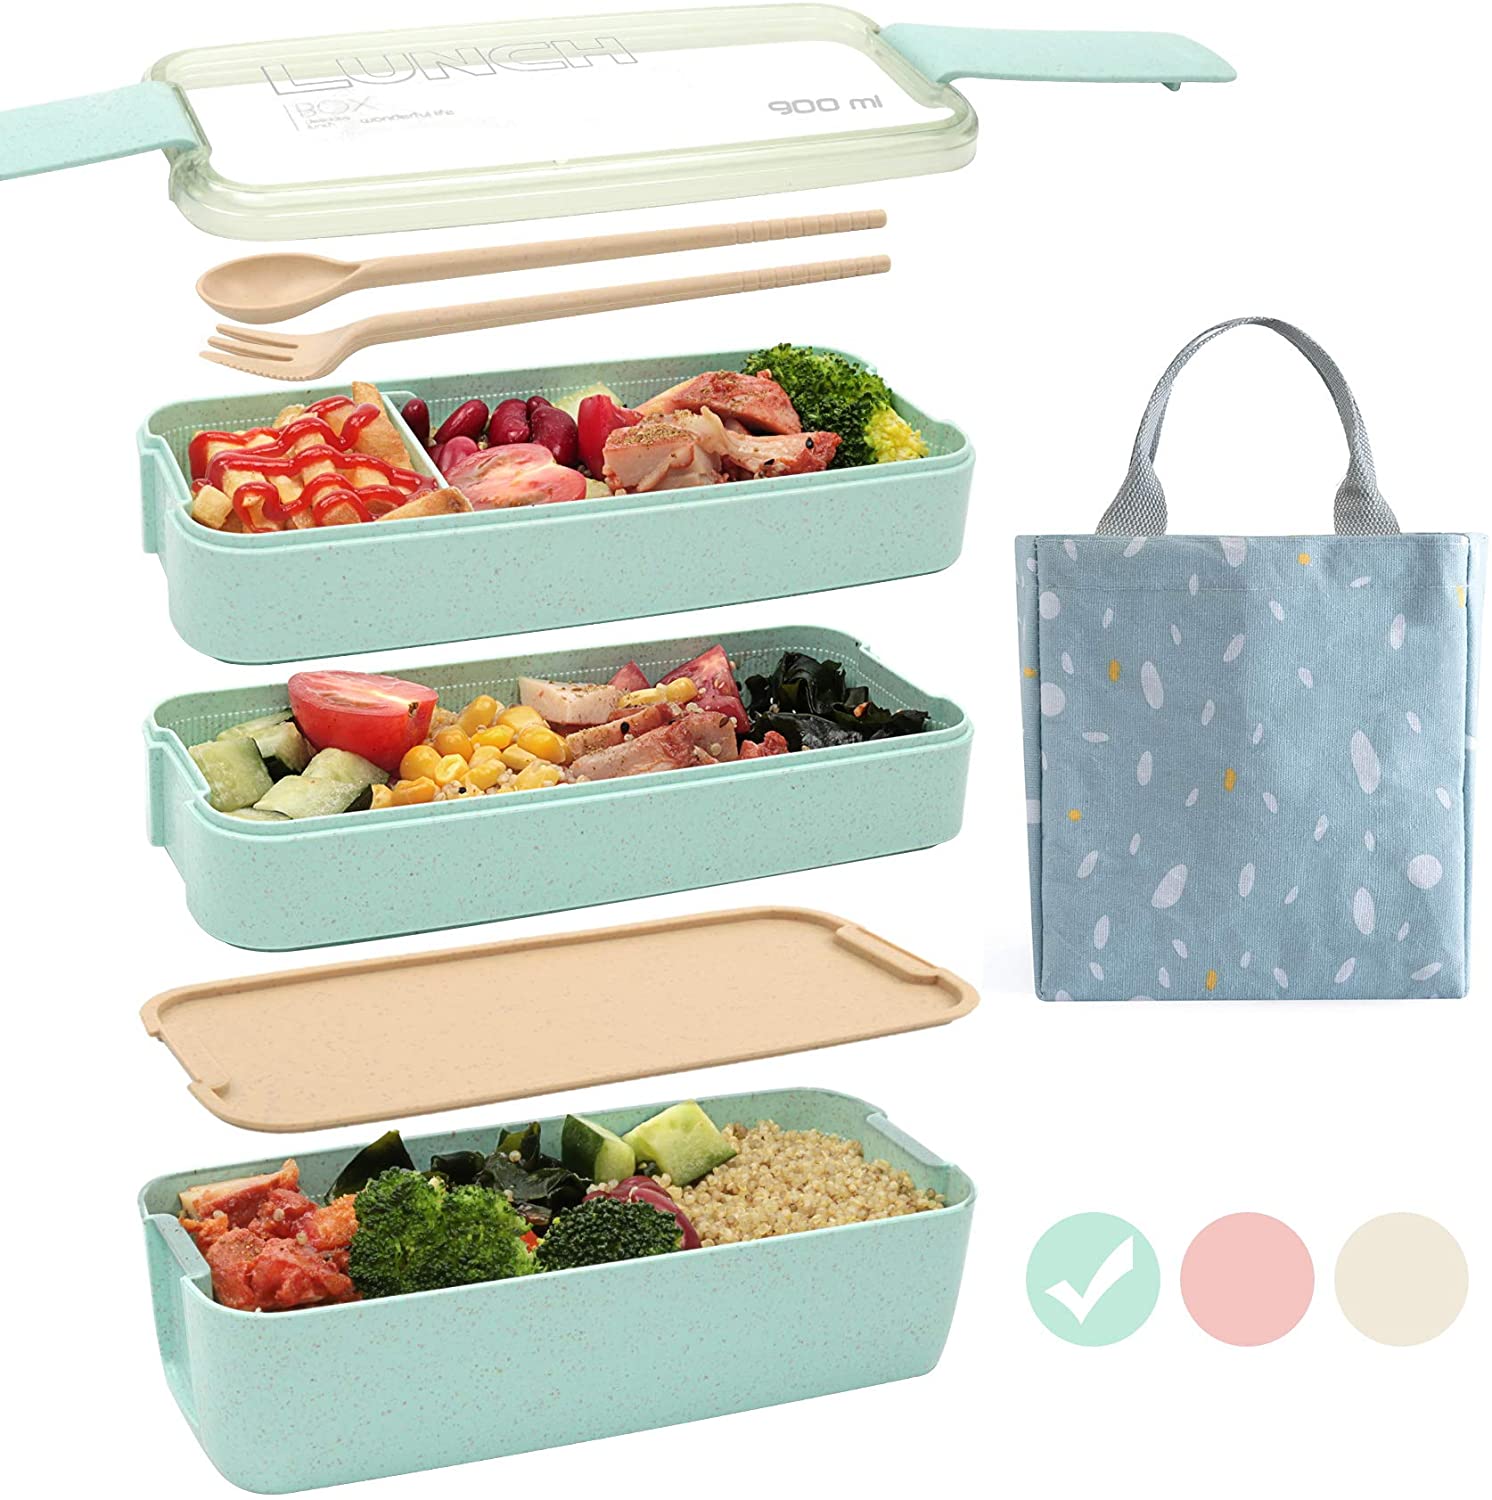 Review of Ozazuco Bento Box Japanese Lunch Box,3-In-1 Compartment